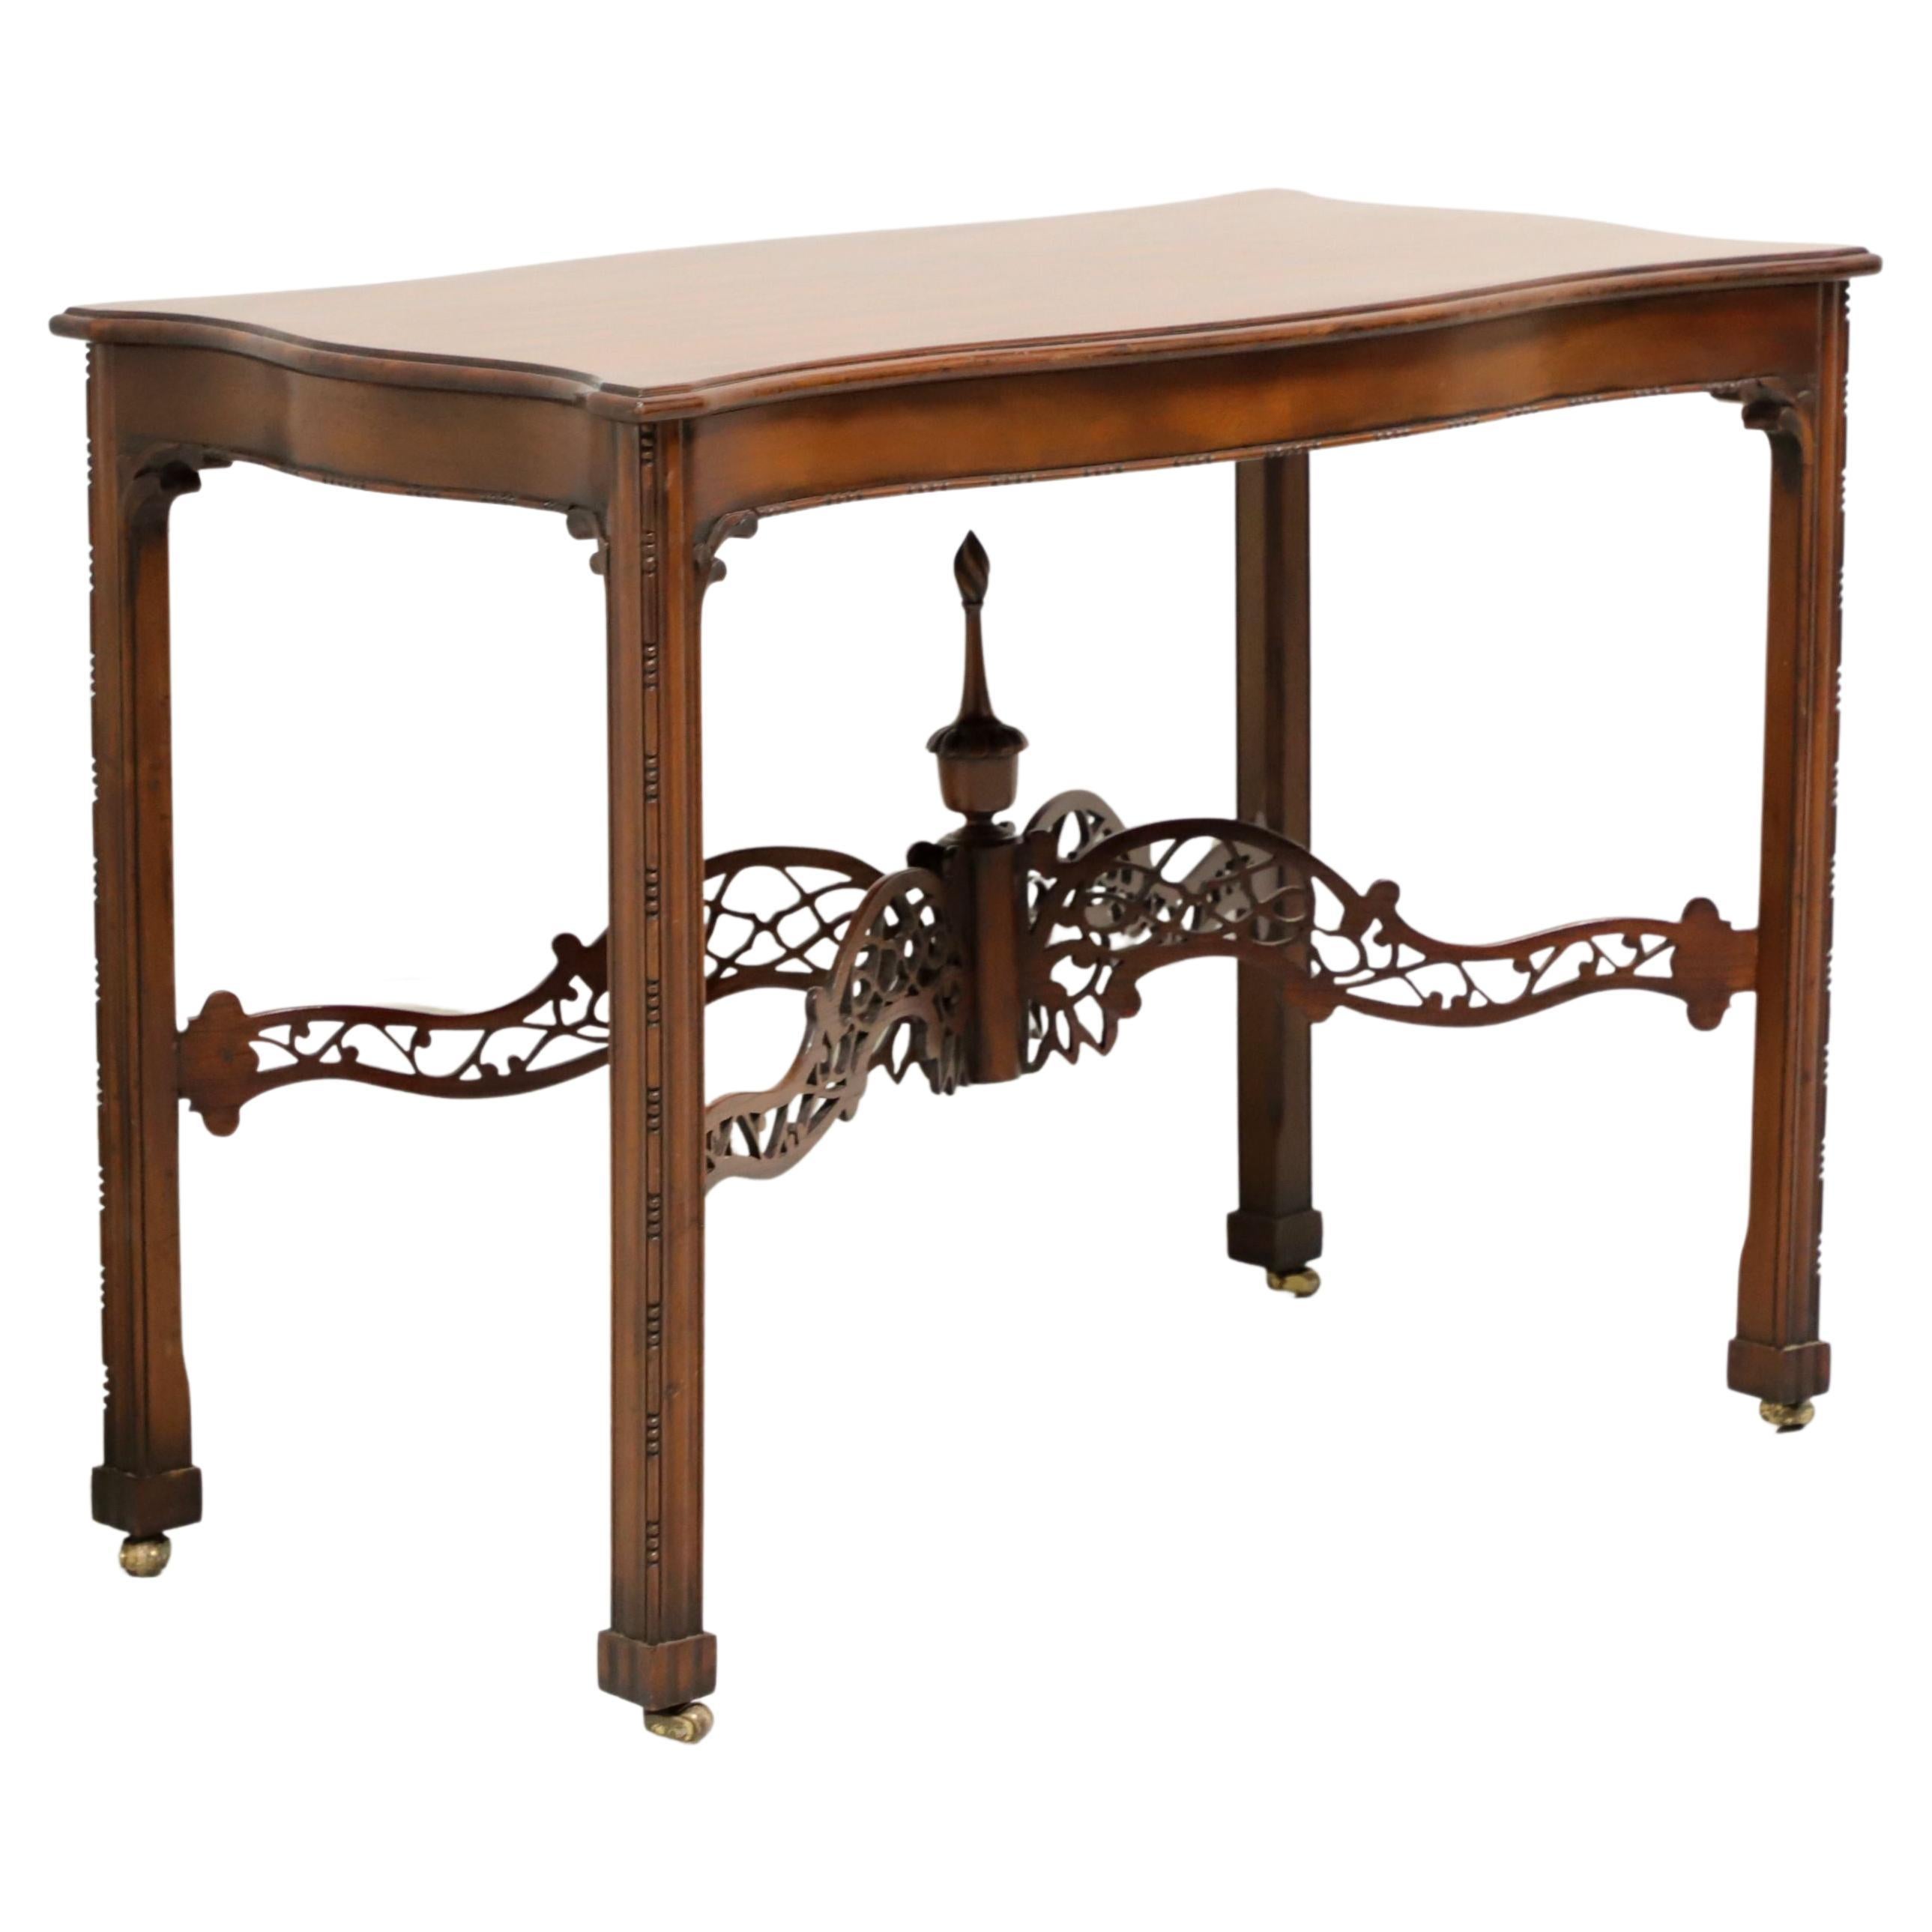 Antique Early 20th Century Mahogany Chippendale Accent Table on Casters